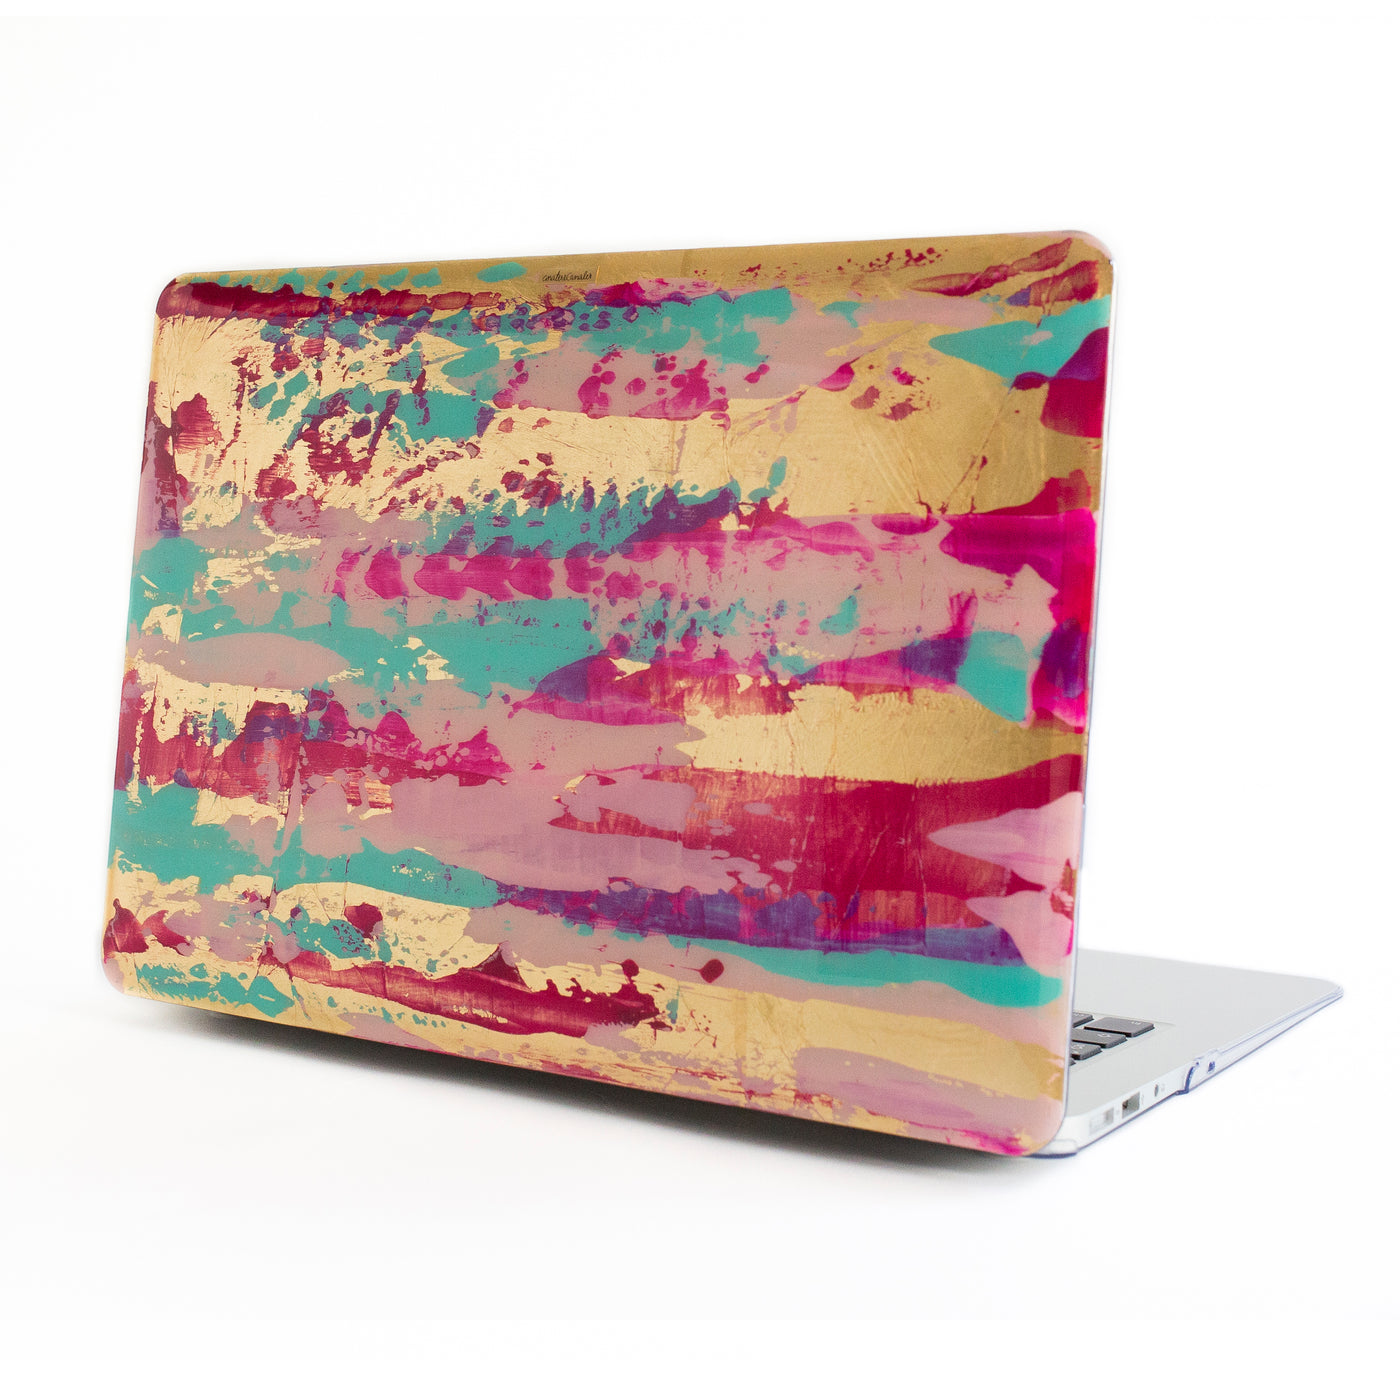 Fairytale Gold Rush Macbook - Ana Tere Canales